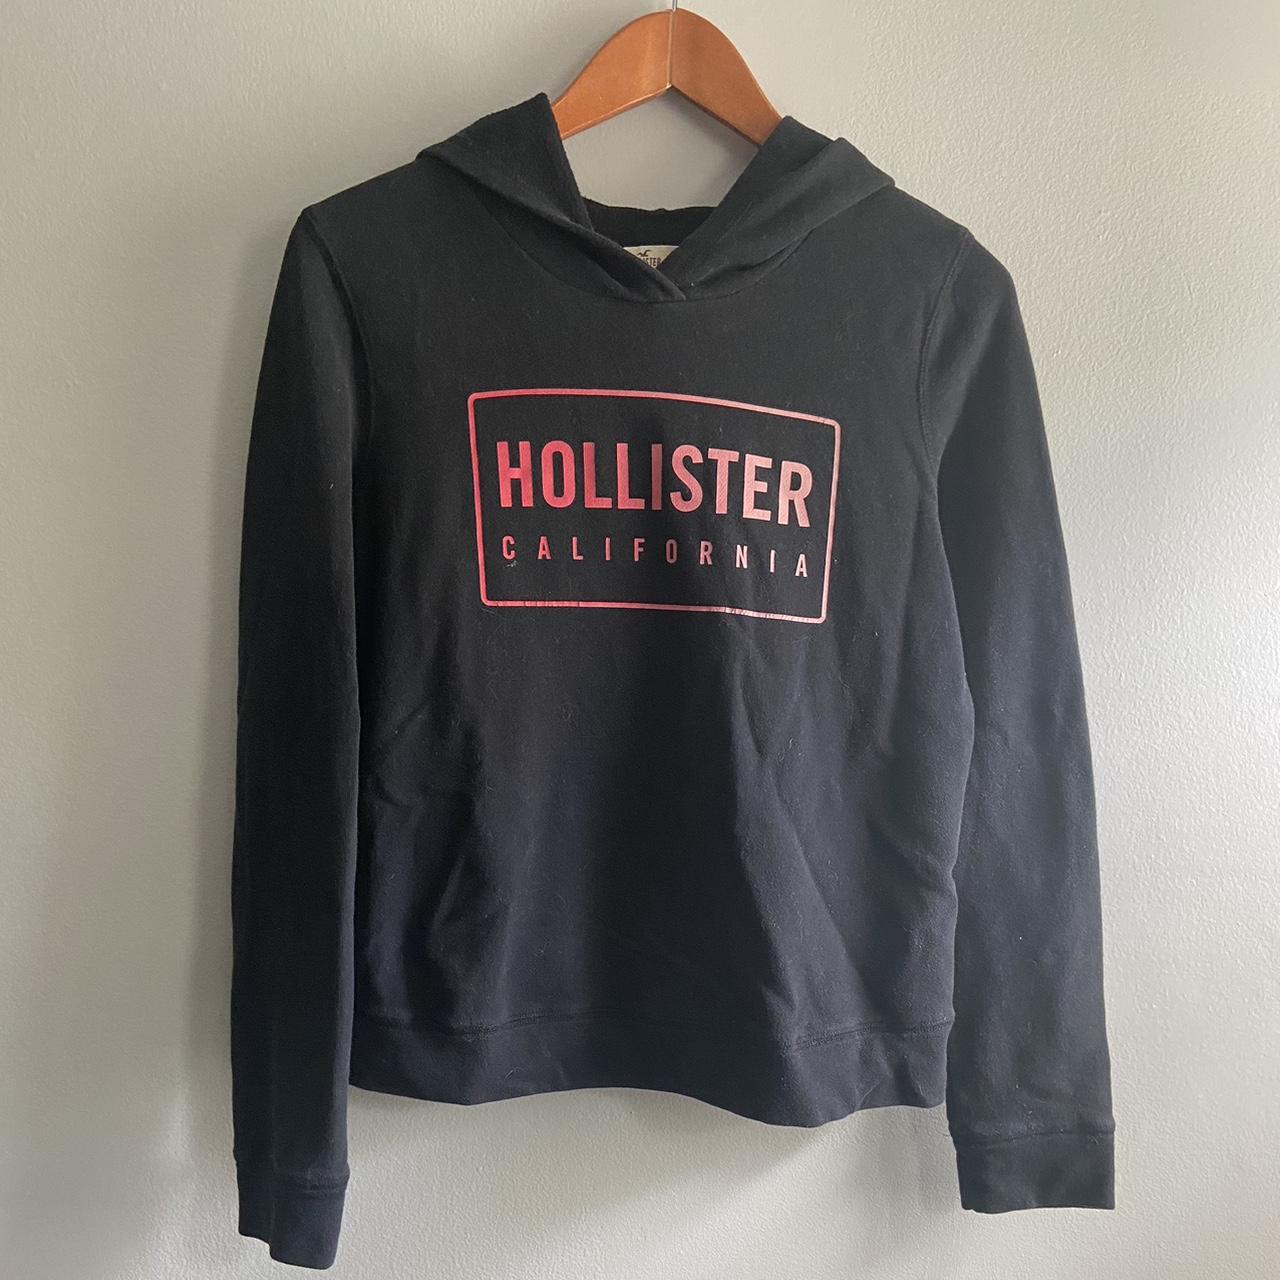 Hollister Ombré Hoodie ABOUT THIS ITEM This... - Depop